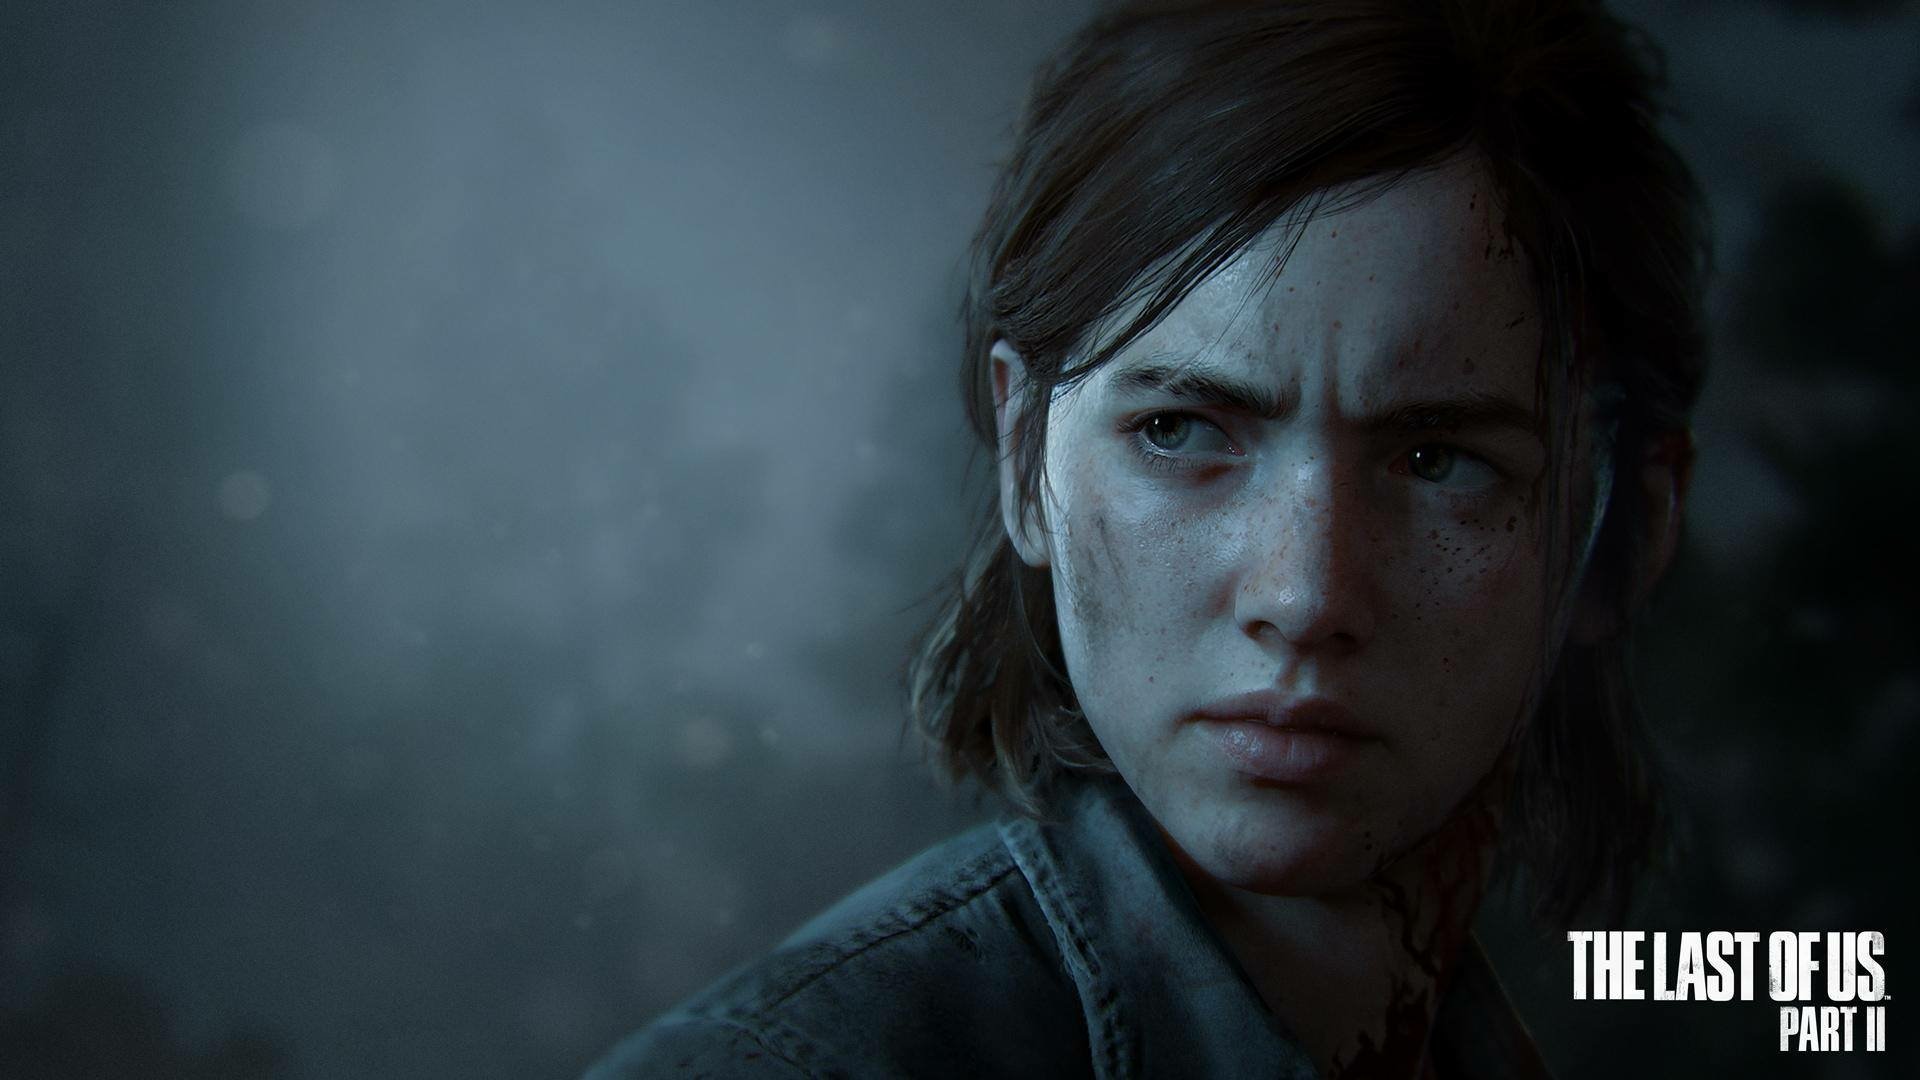 Wallpaper : The Last of Us 2, The Last of Us, Ellie 1920x1080 - shenzehan -  1940769 - HD Wallpapers - WallHere